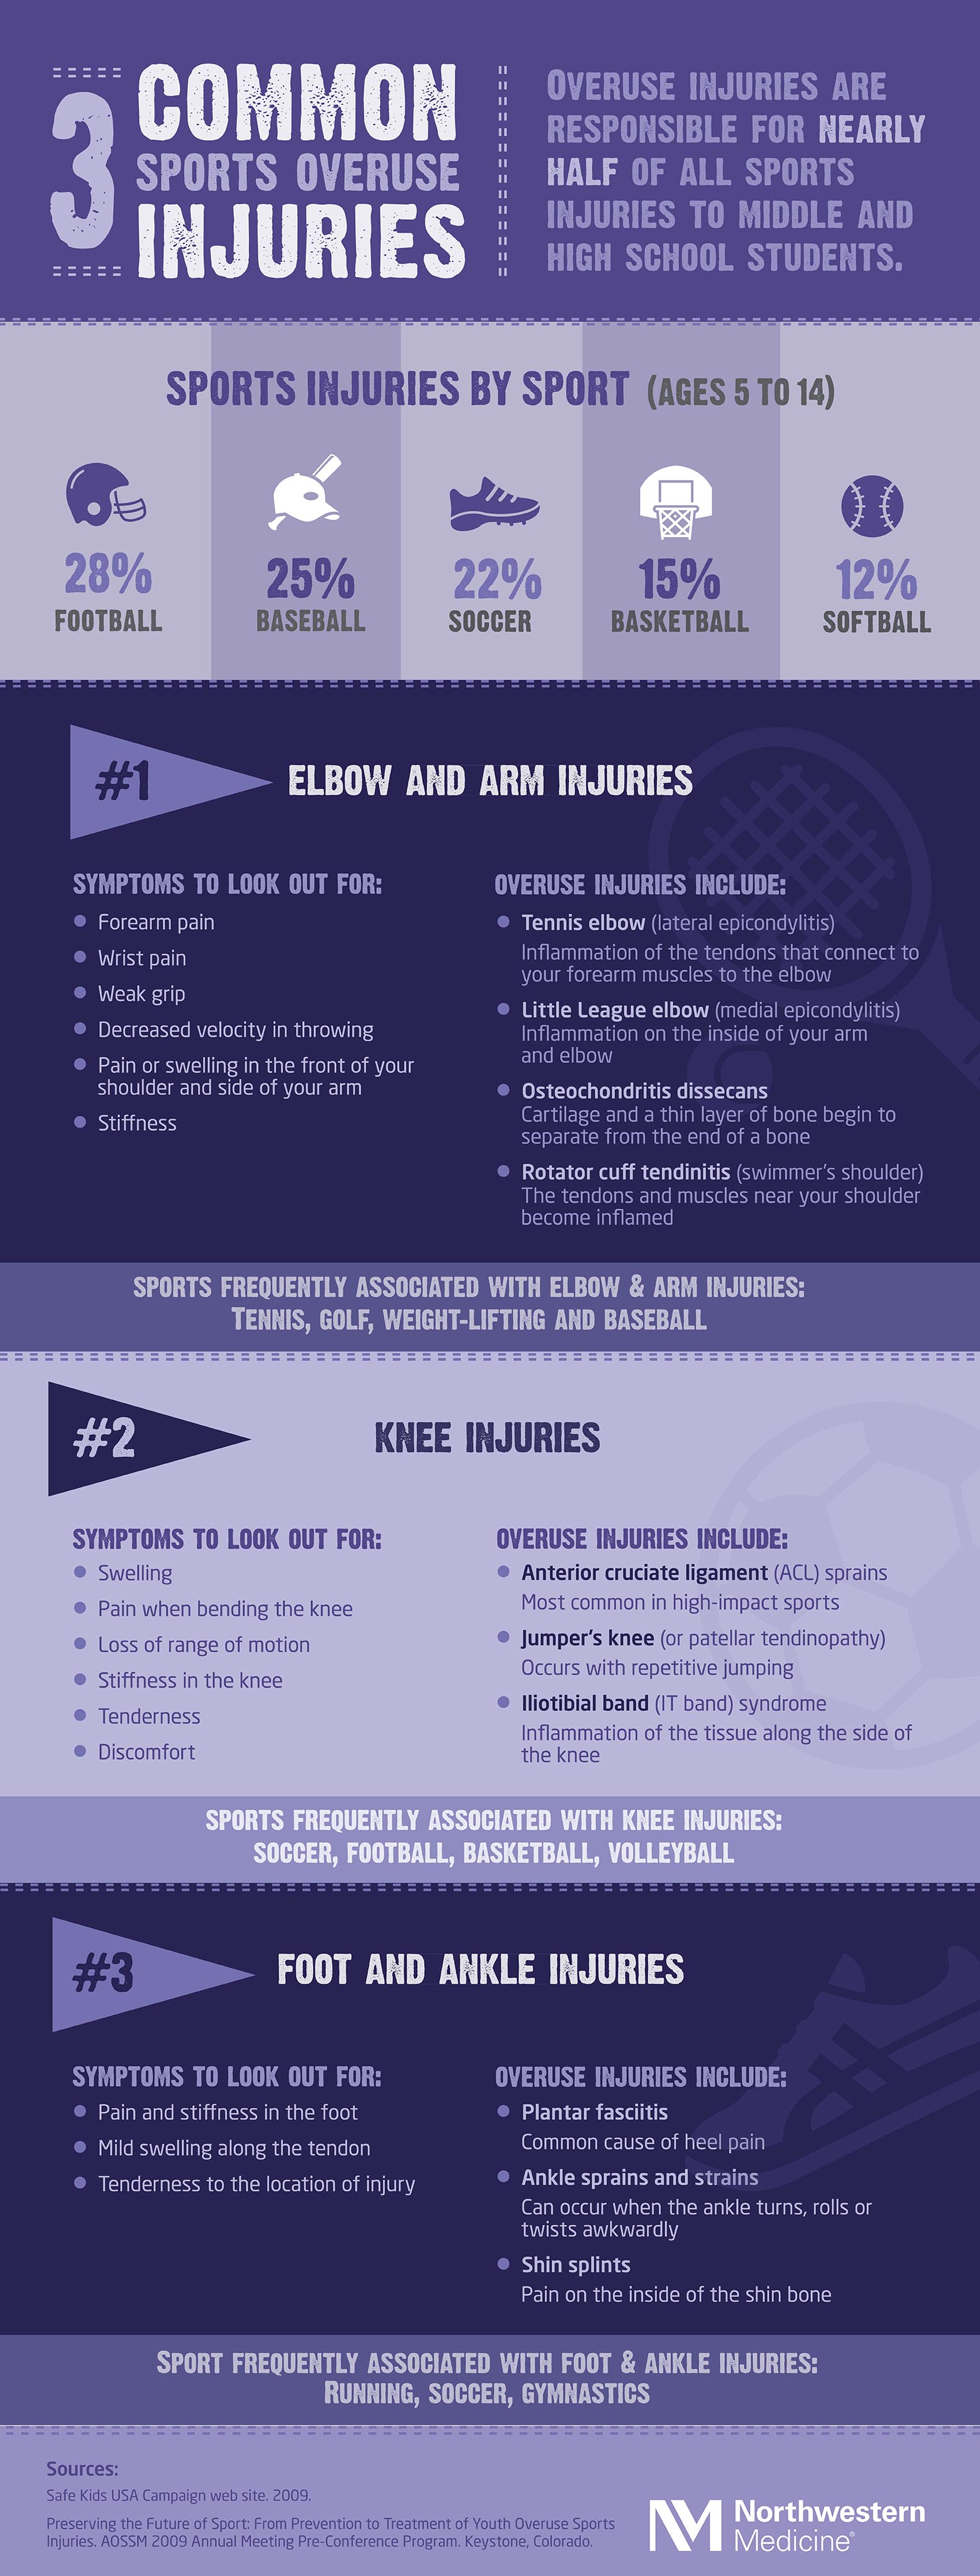 common-sports-injuries-infographic